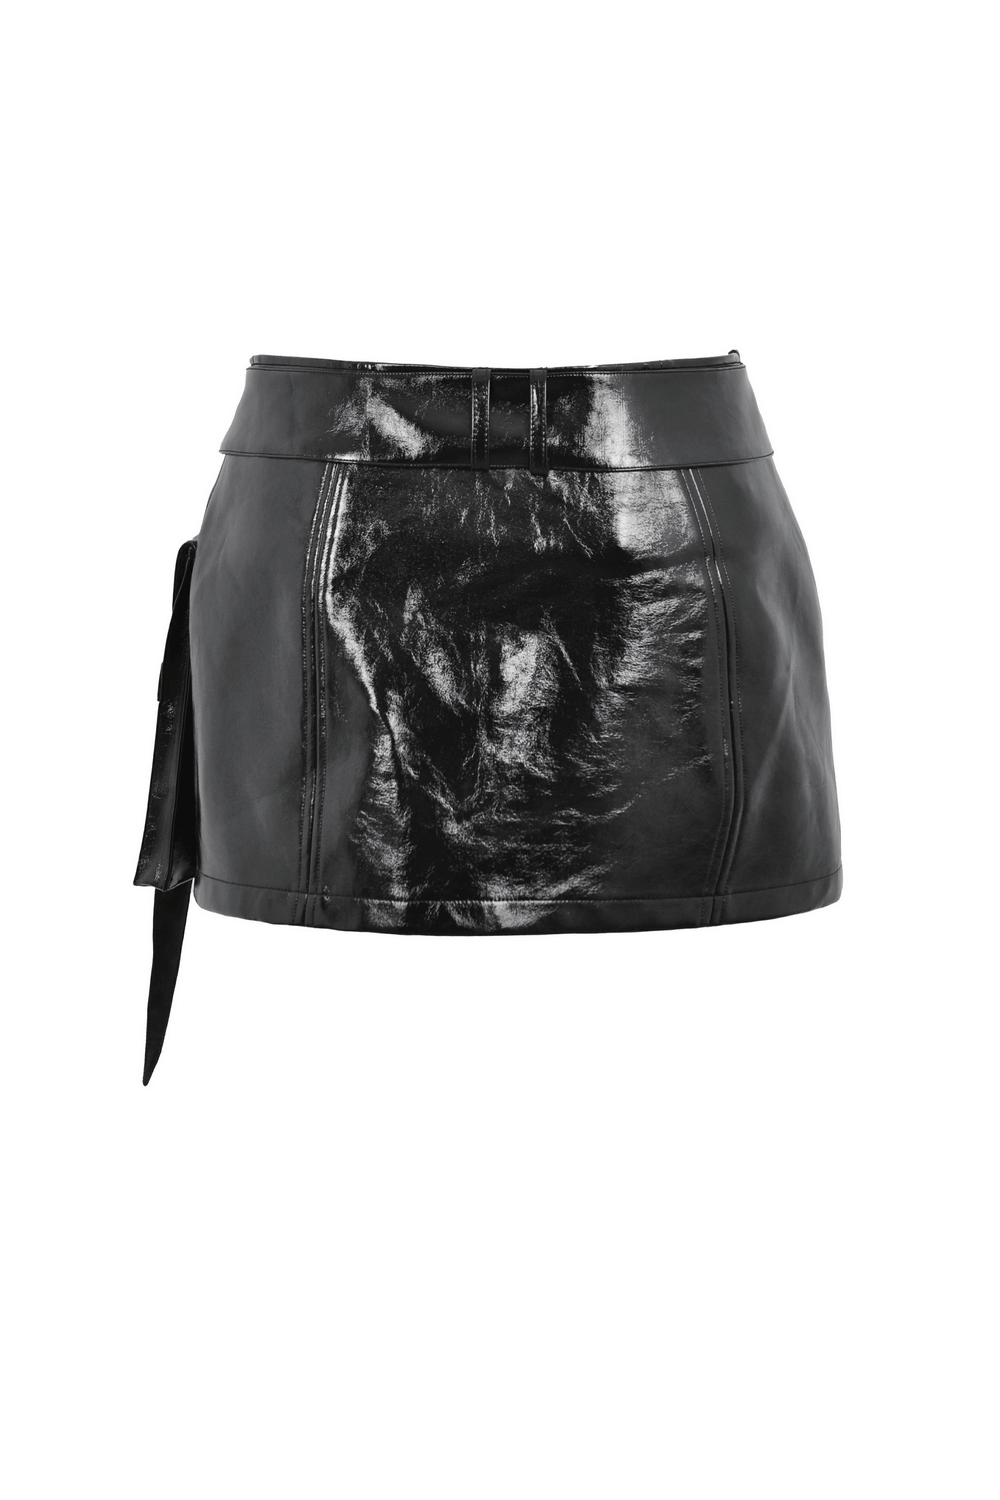 Punk Women's Mini Skirt with Pockets and Spiked Accents